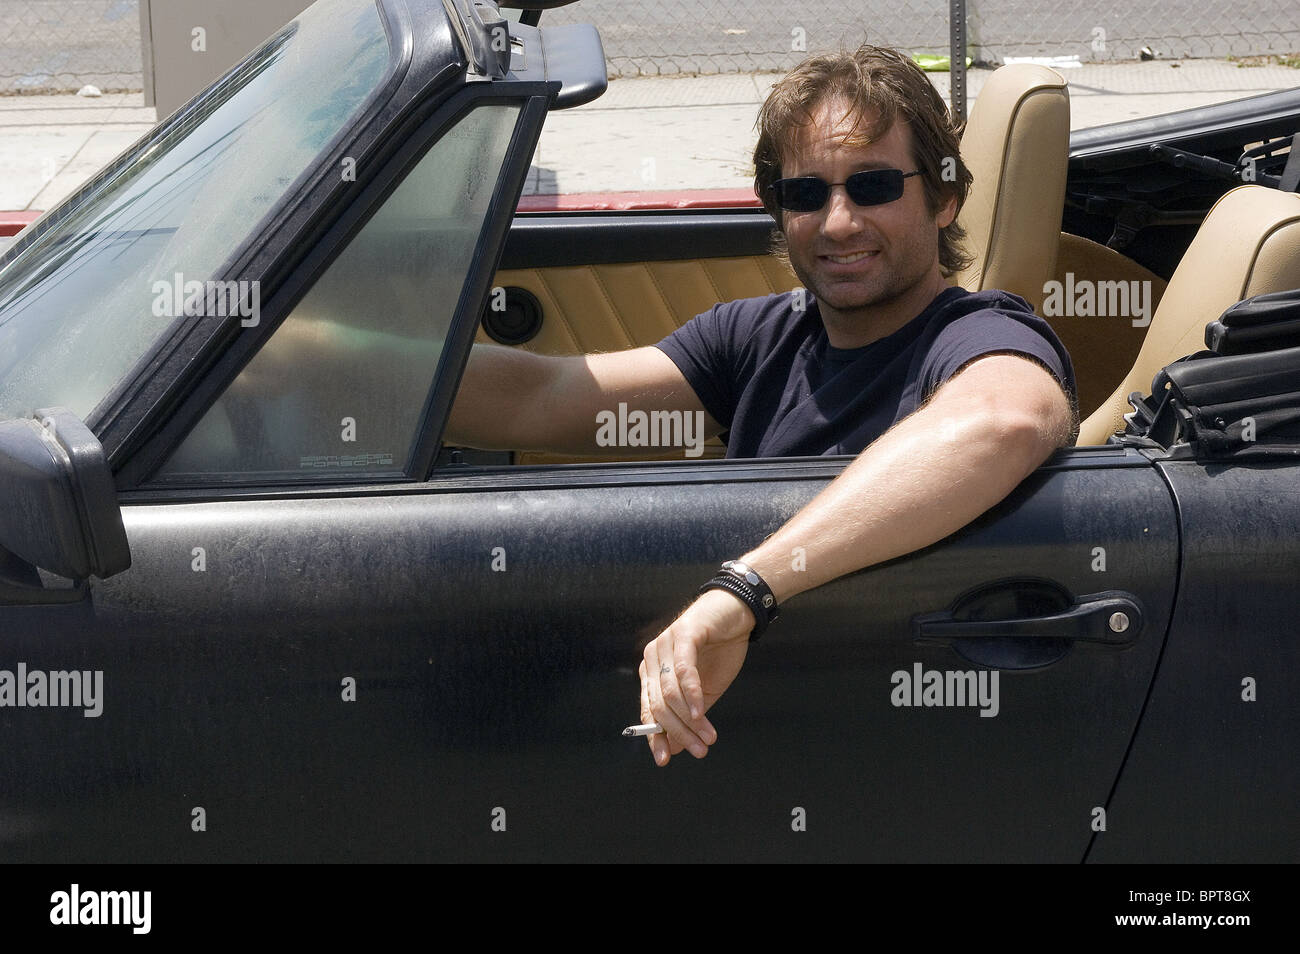 Hank Moody Stock Photos Hank Moody Stock Images Alamy Images, Photos, Reviews